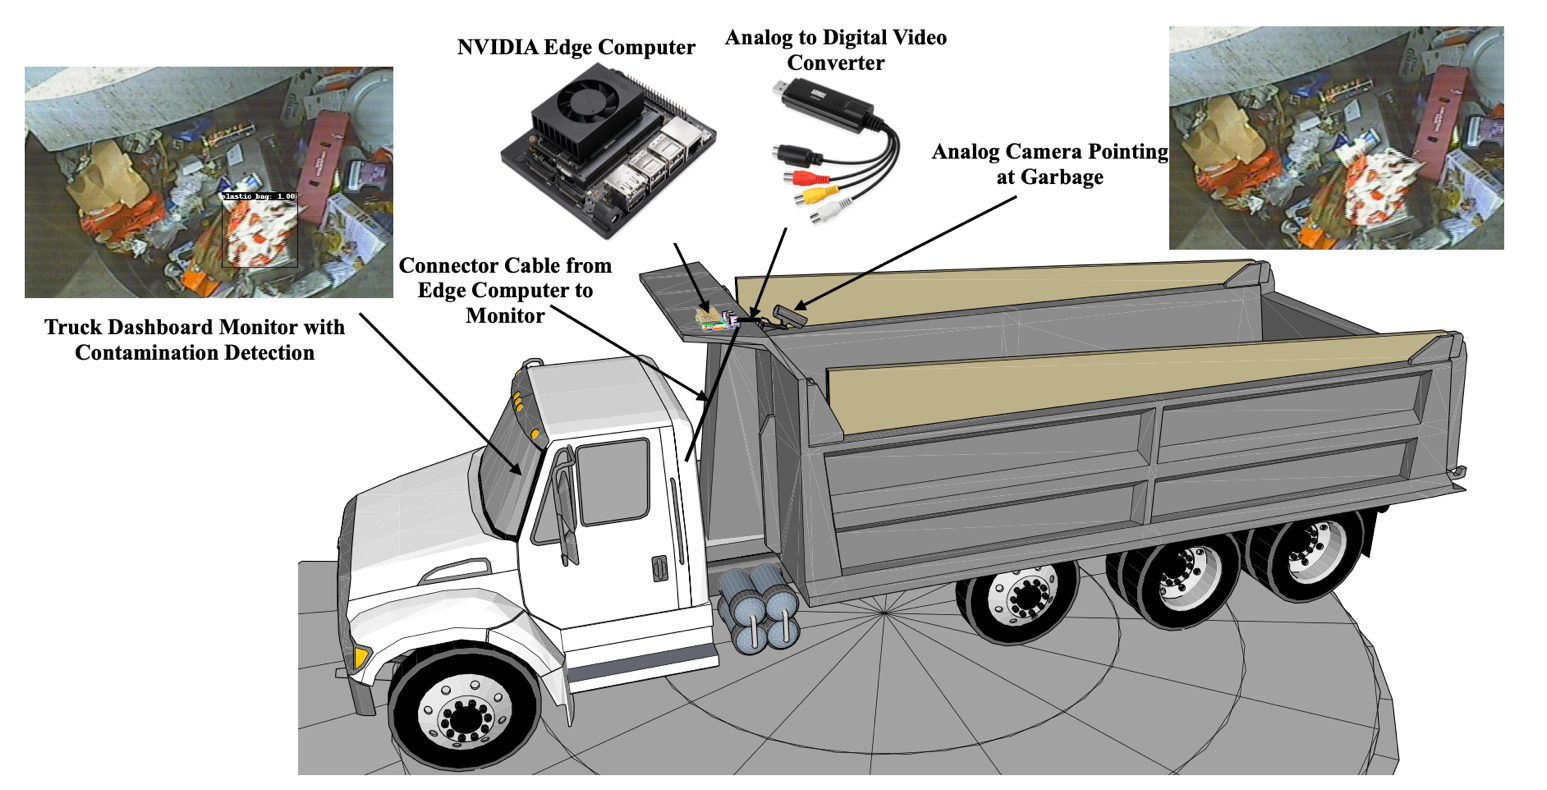 Conceptual illustration of the proposed automated plastic bag contamination detection, including a collection truck, computer, and images of garbage.